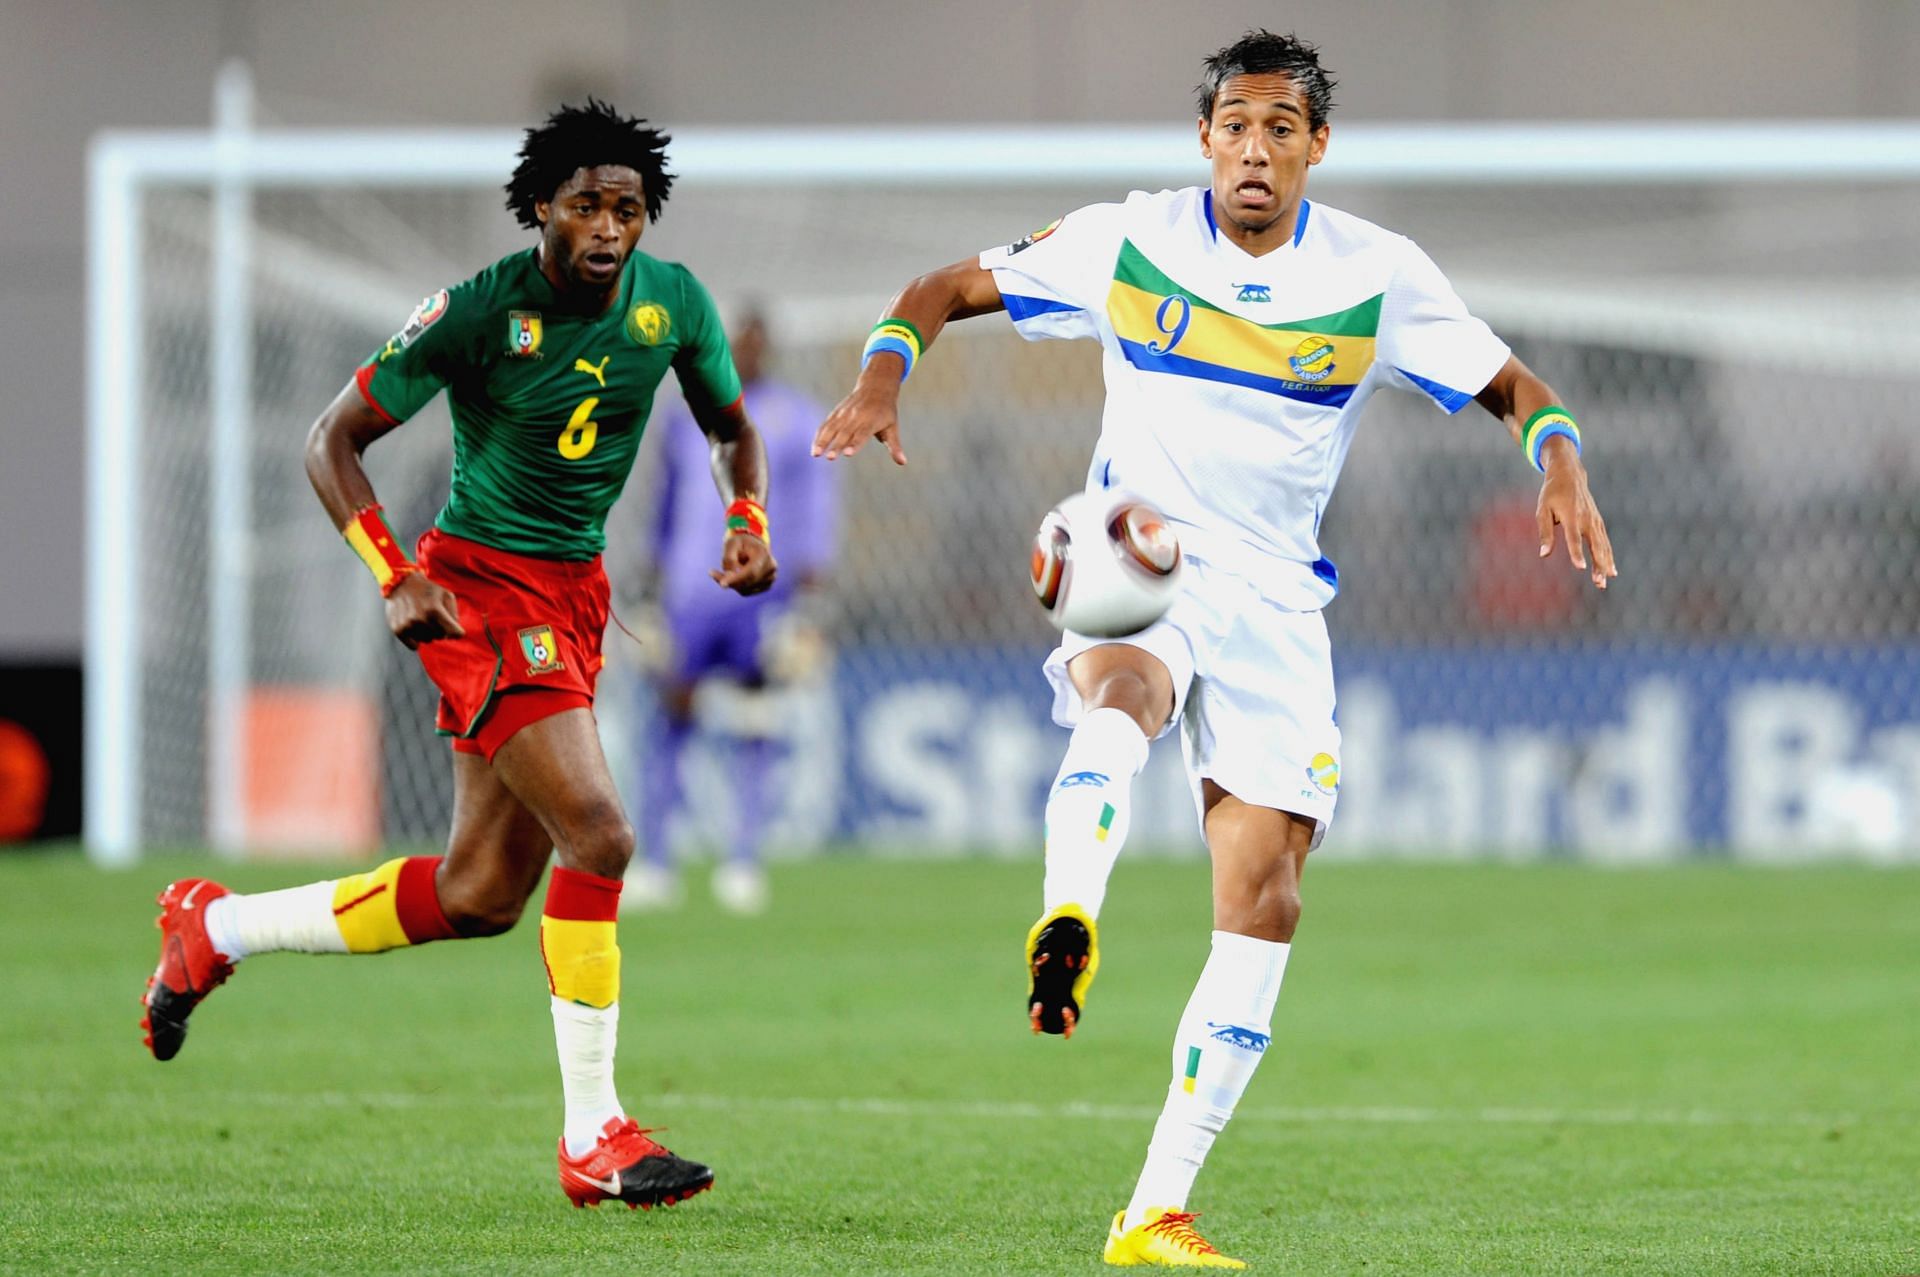 Gabon are winless in both their clashes with Mauritania